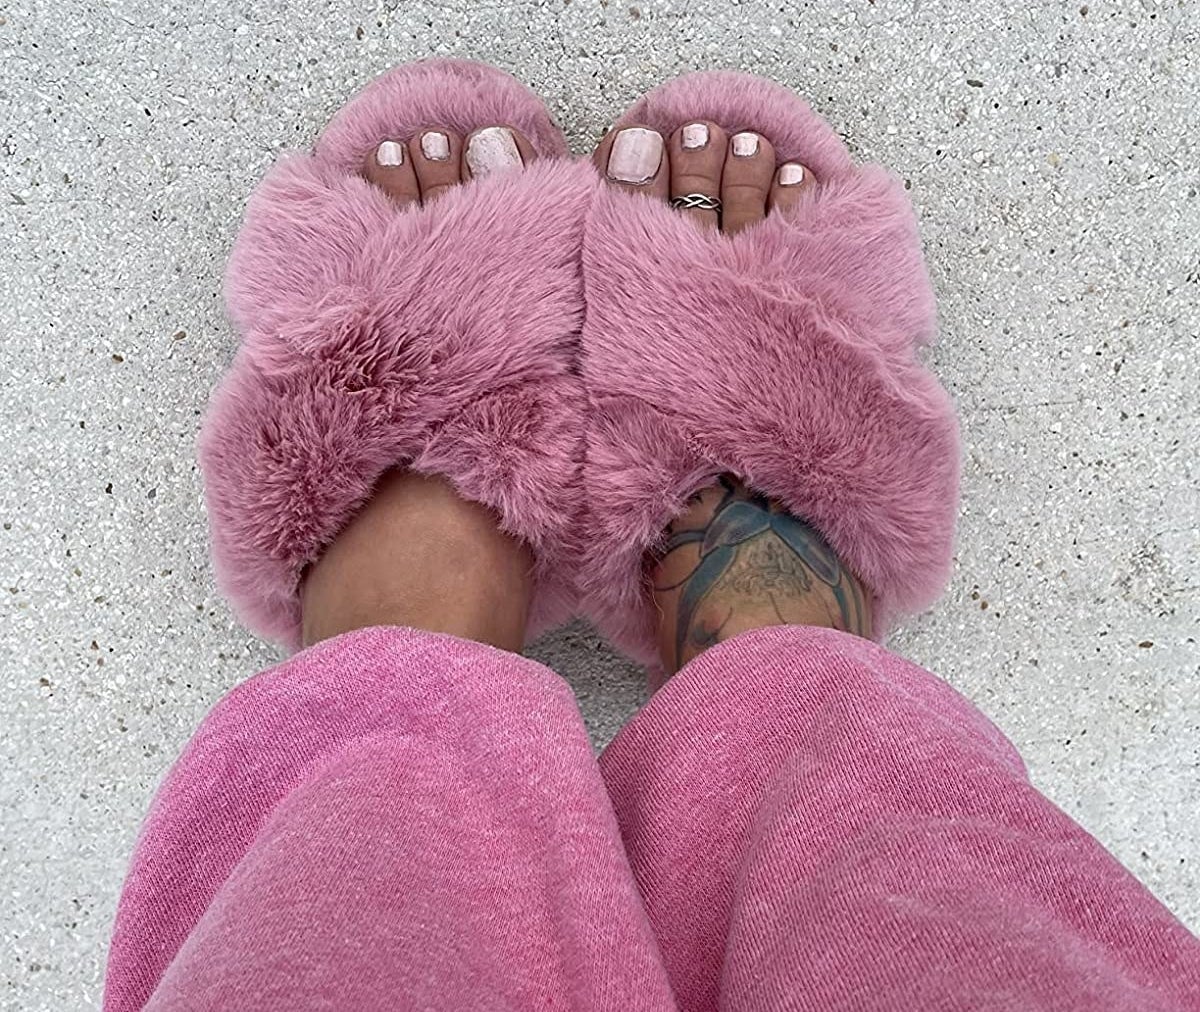 Reviewer wearing pink fluffy slippers